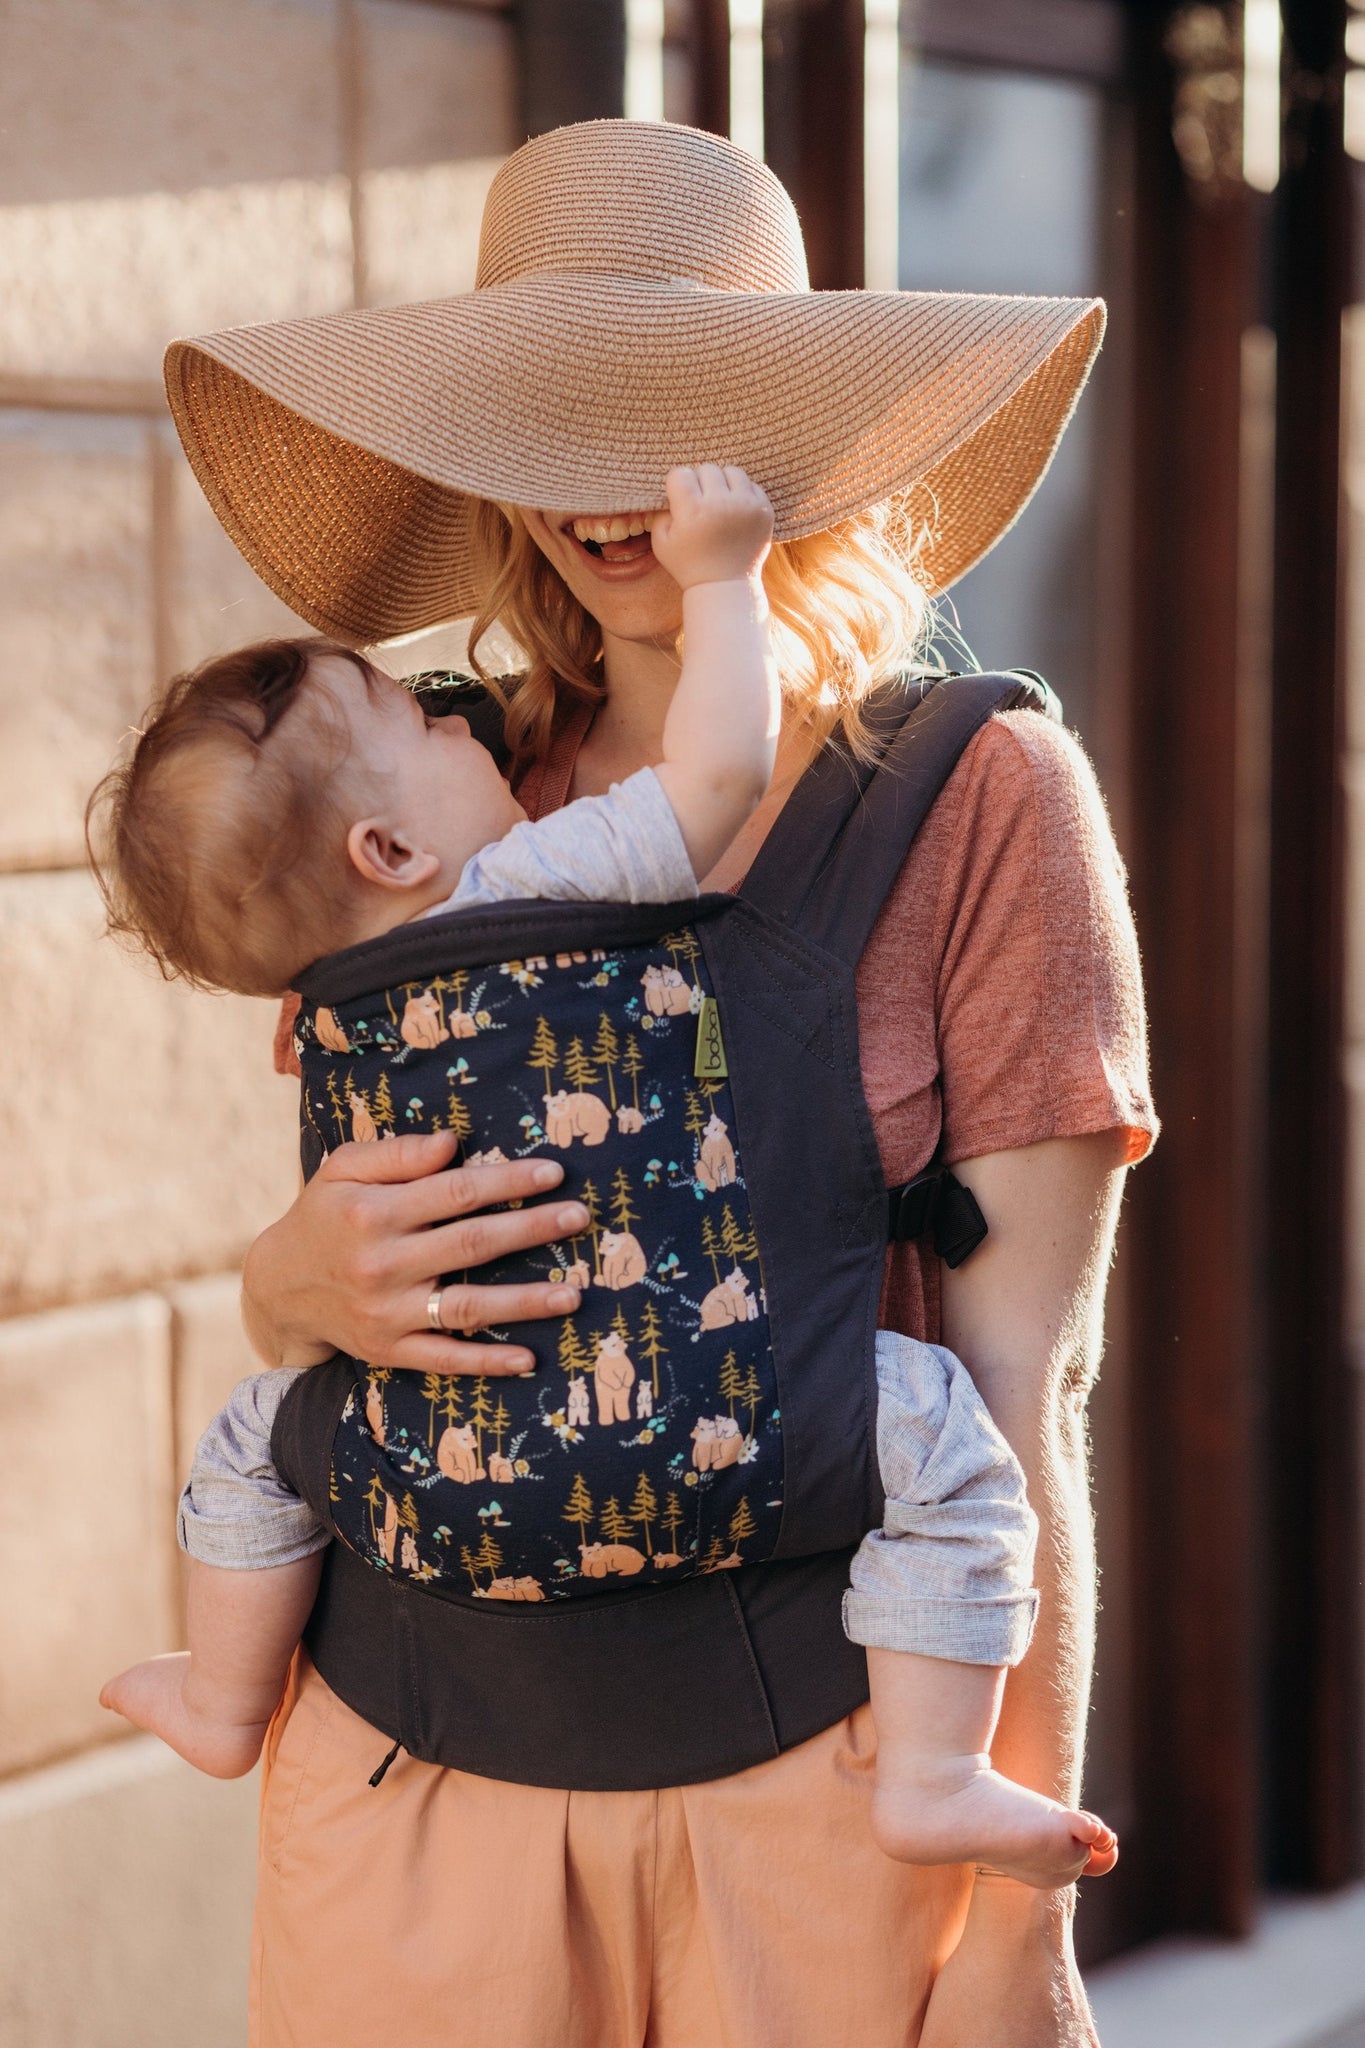 Our streamlined soft structured baby carrier is designed to go and grow with your little one. This ergonomic front facing baby carrier is ready to use from infant to toddler.